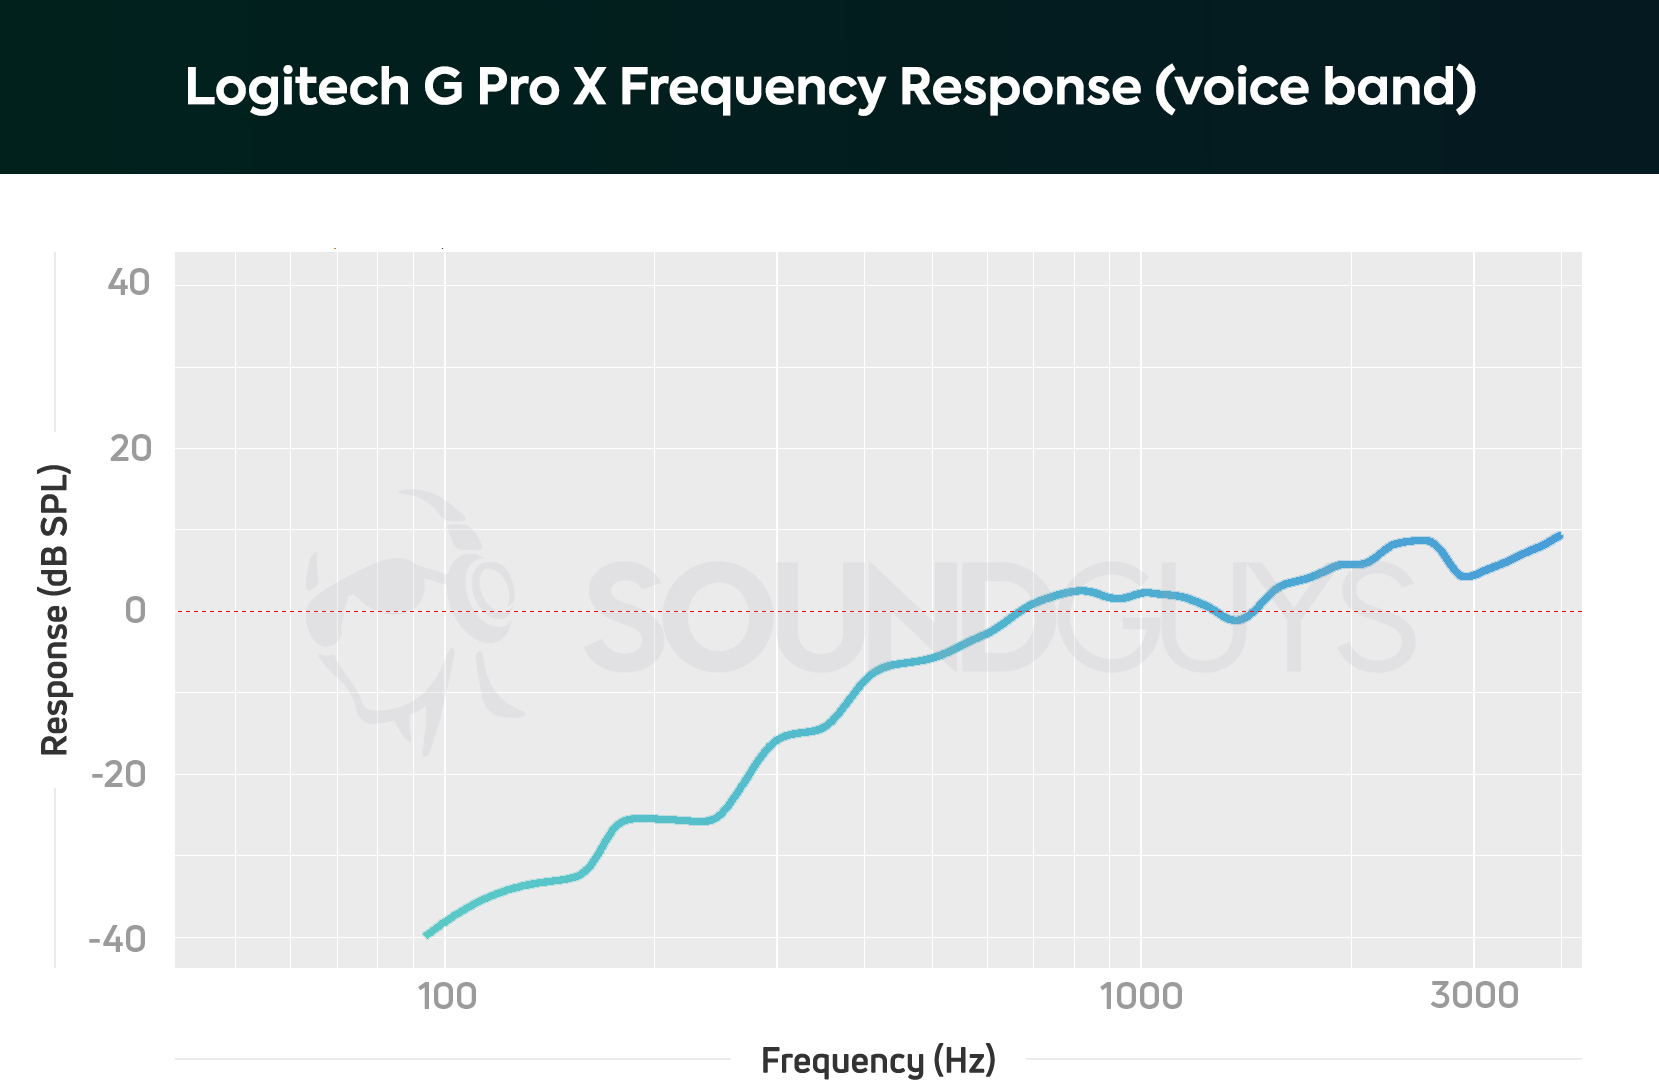 A frequency response chart for the Logitech G Pro X gaming headset microphone